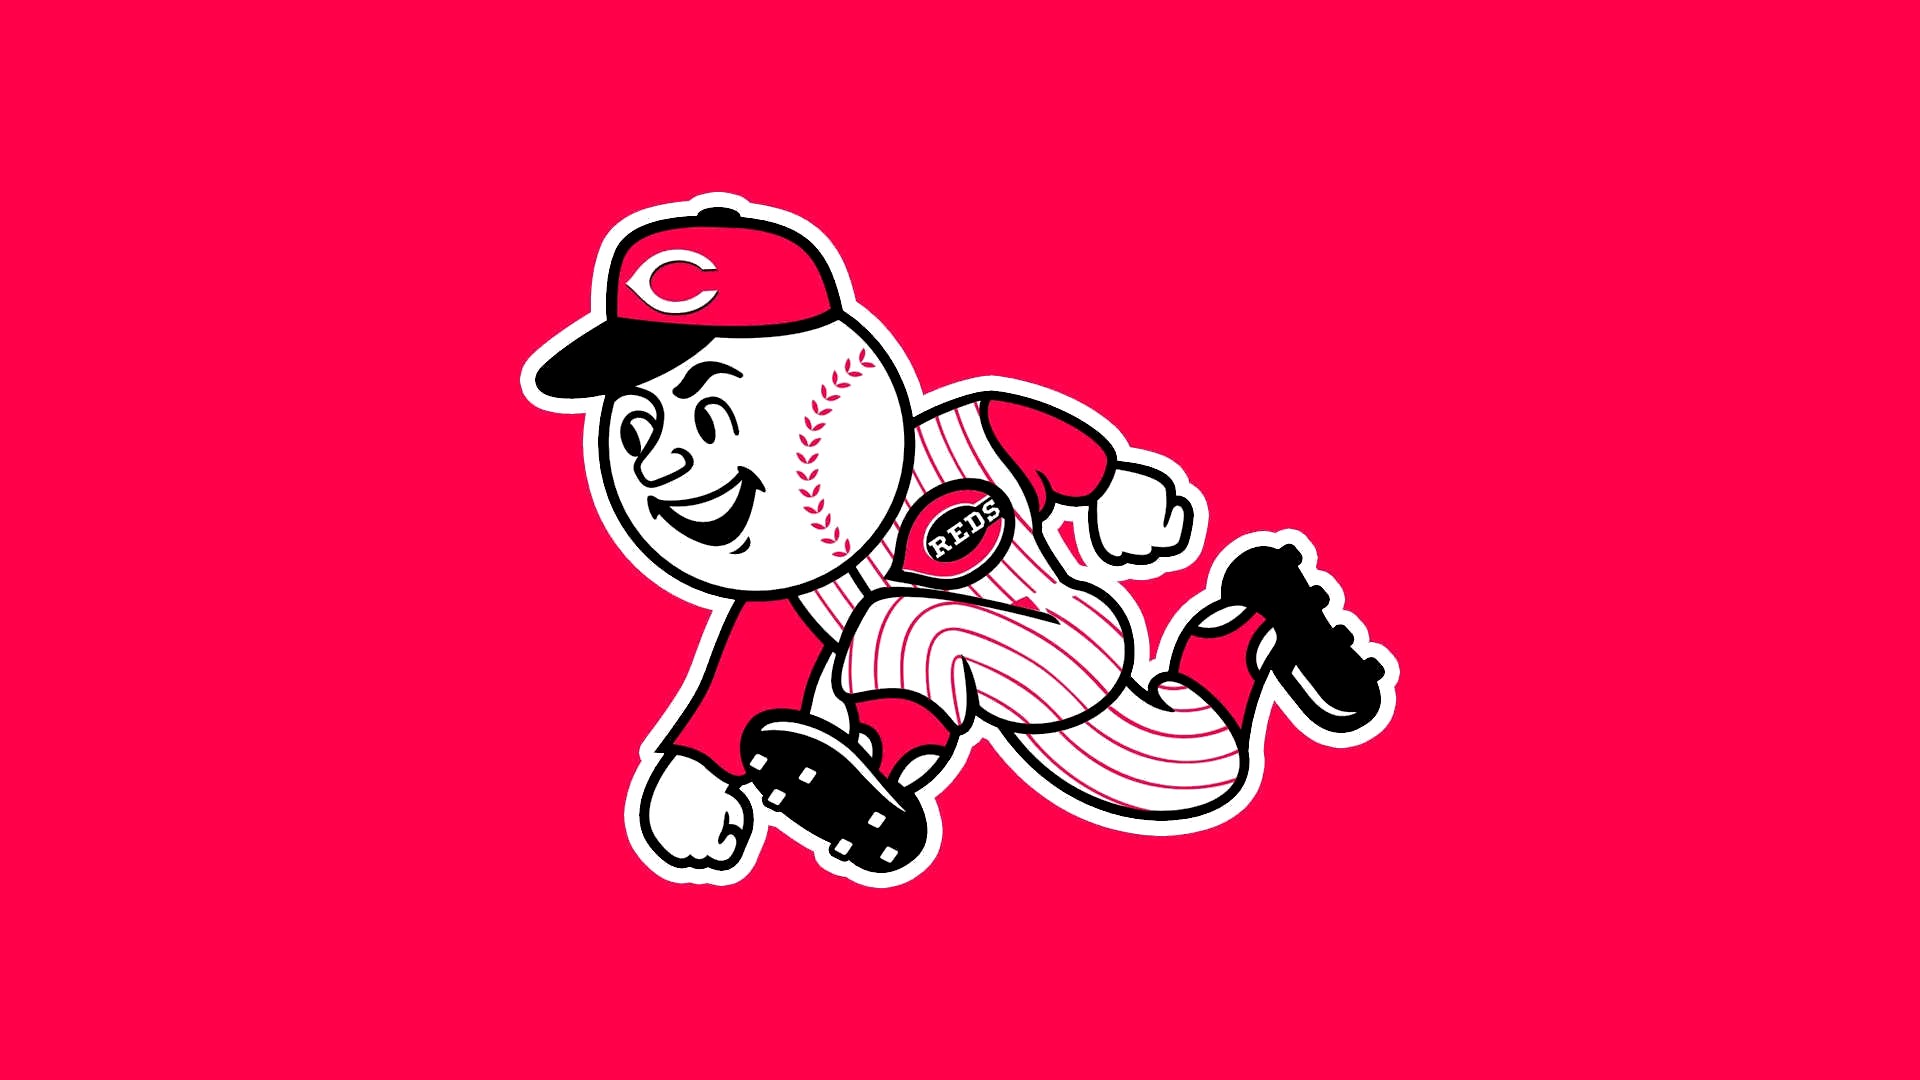 Cincinnati Reds MLB Wallpaper with high-resolution 1920x1080 pixel. You can use this wallpaper for Mac Desktop Wallpaper, Laptop Screensavers, Android Wallpapers, Tablet or iPhone Home Screen and another mobile phone device